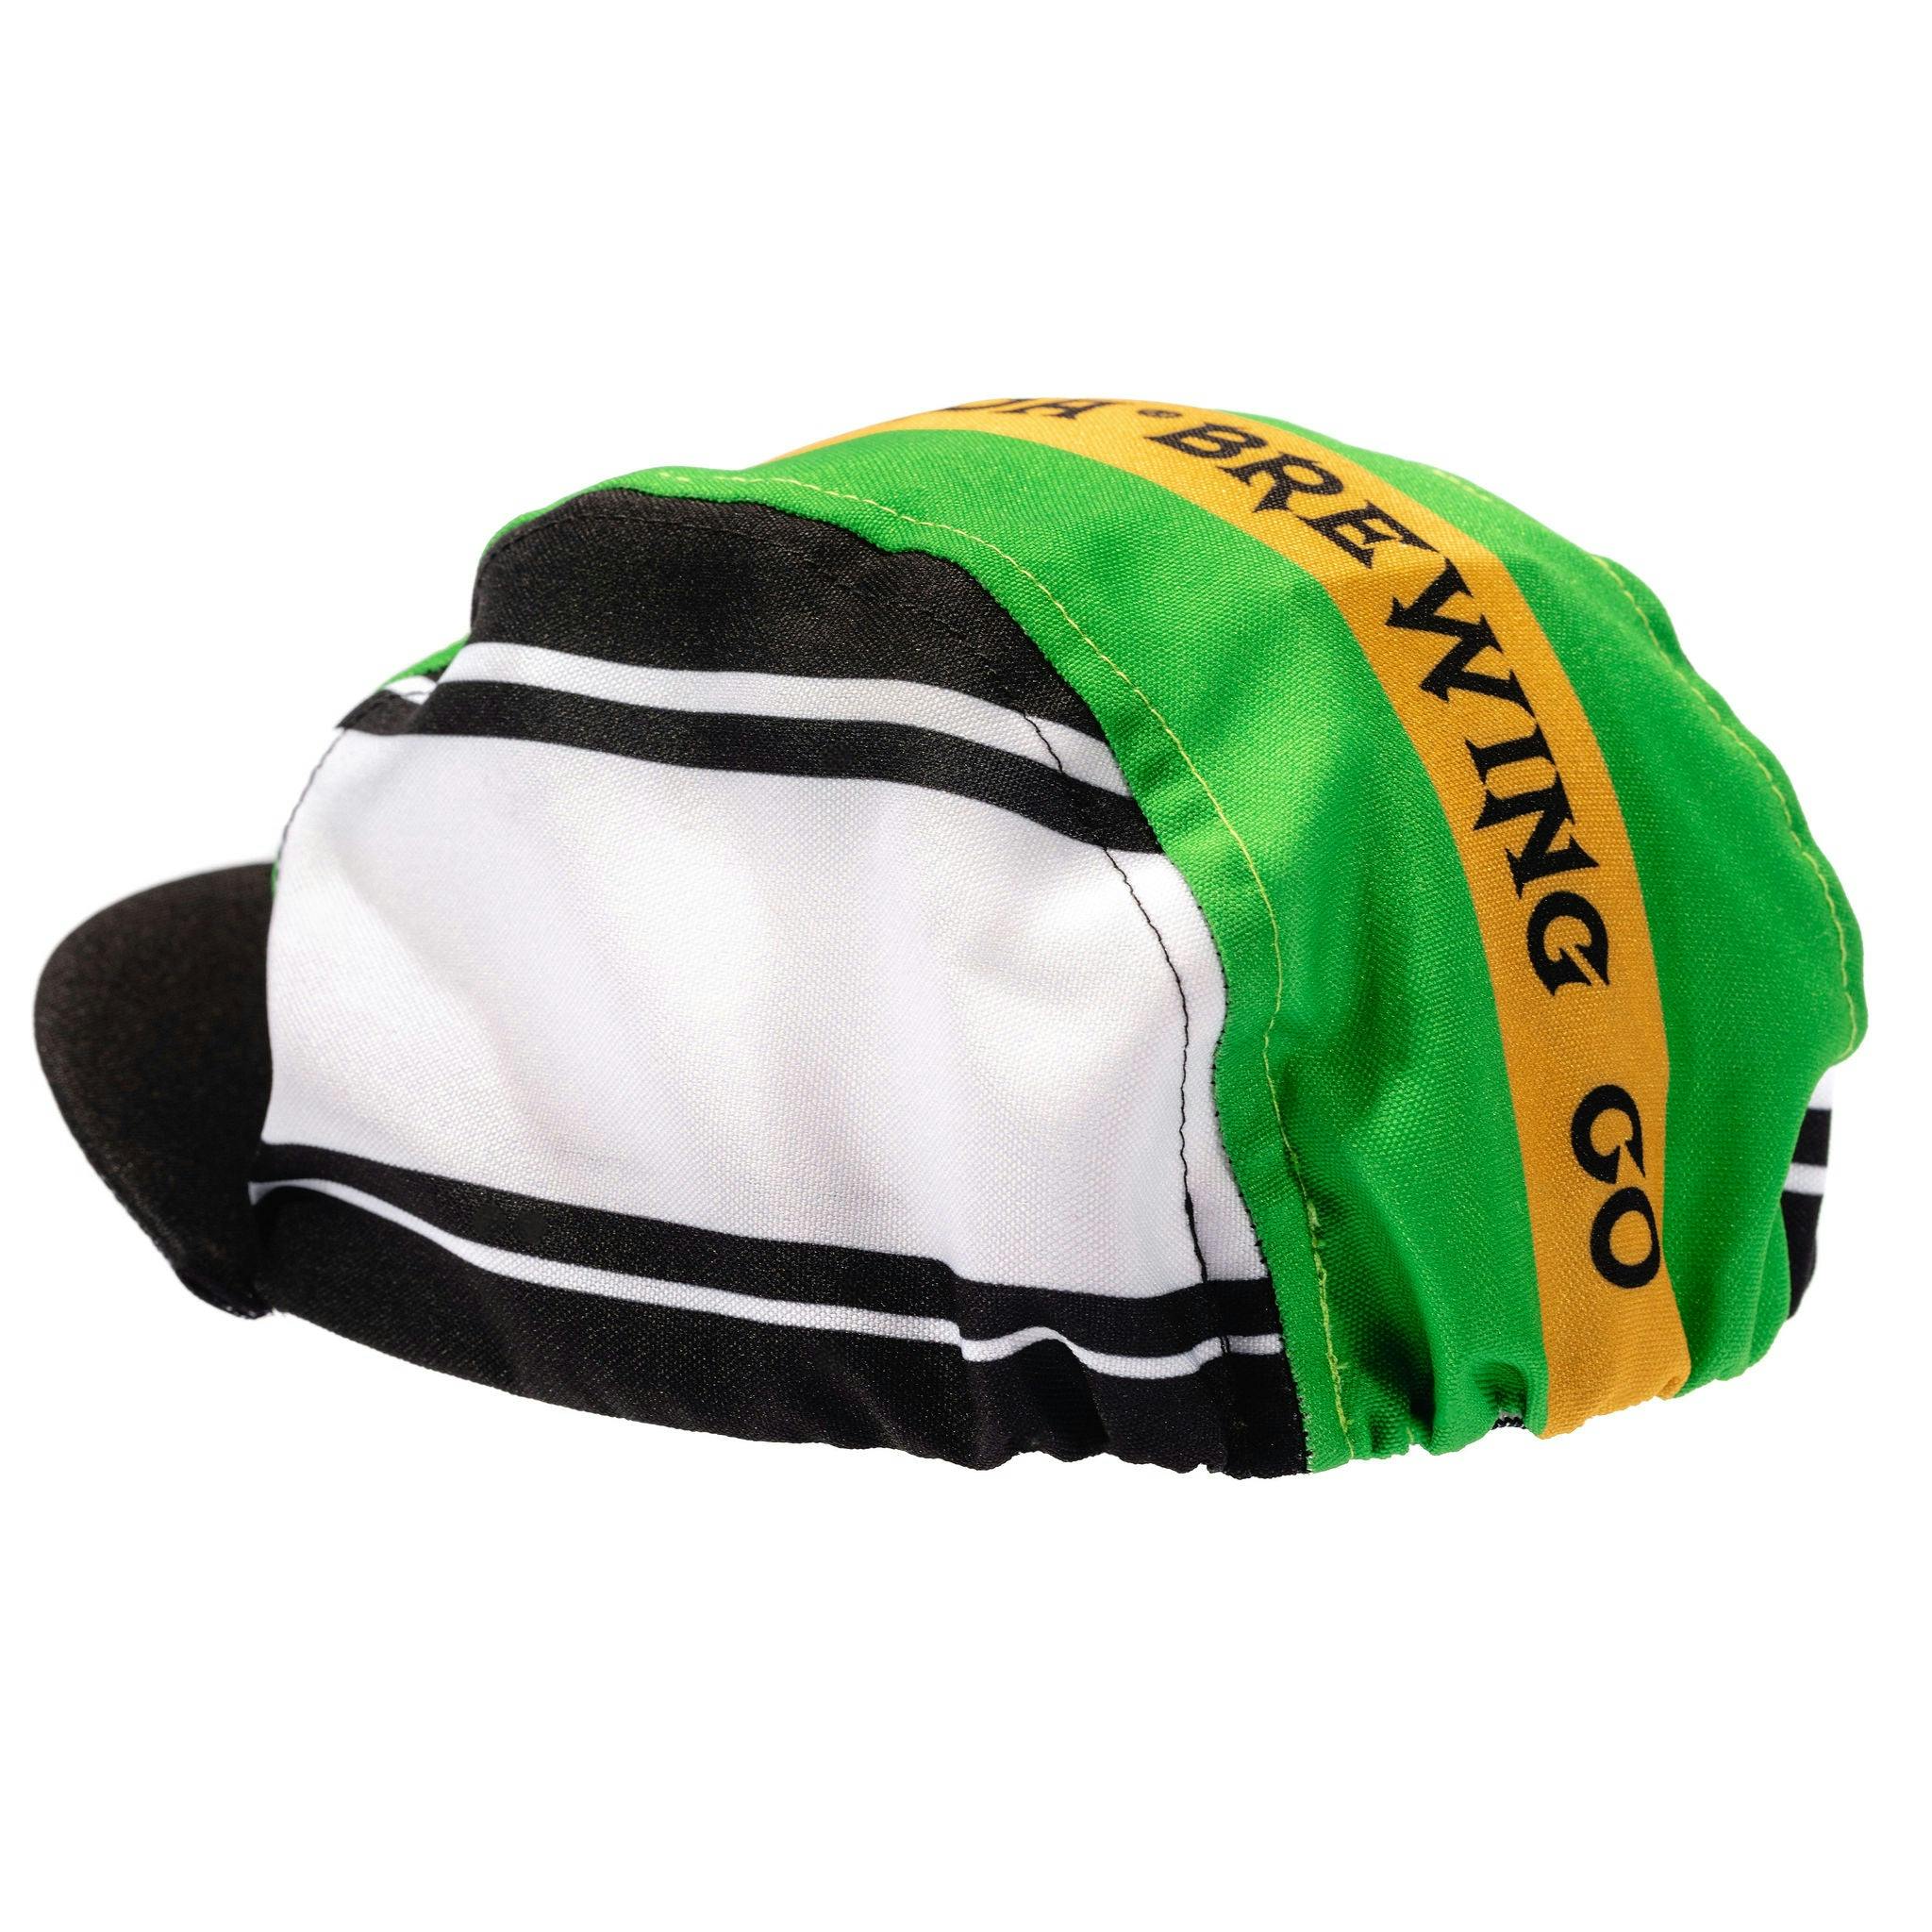 Sierra Nevada Brewing Co. Cycling Cap - back view